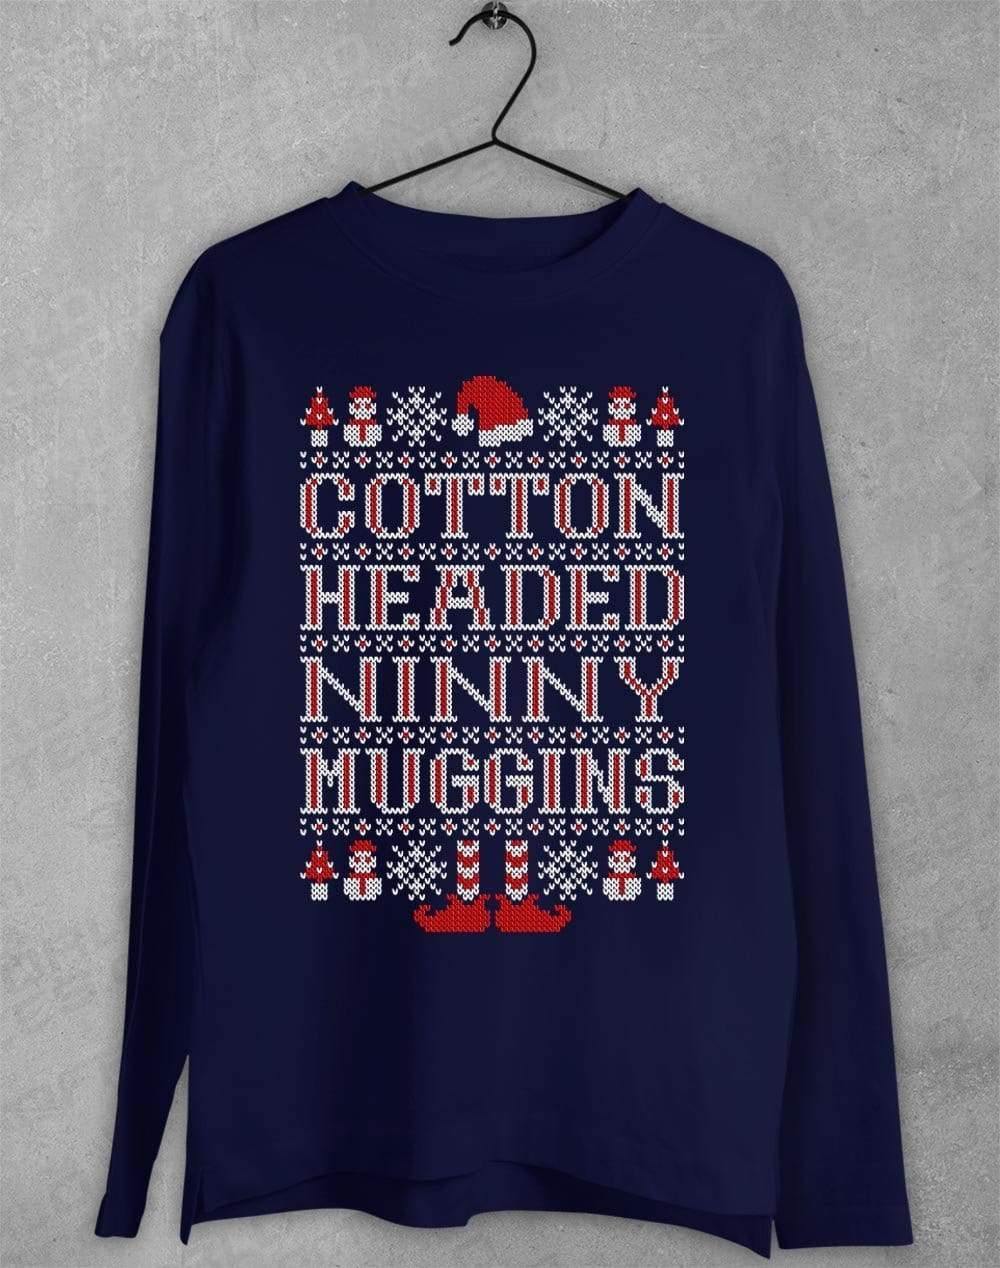 Cotton Headed Ninny Muggins Festive Knitted-Look Long Sleeve T-Shirt S / Navy  - Off World Tees